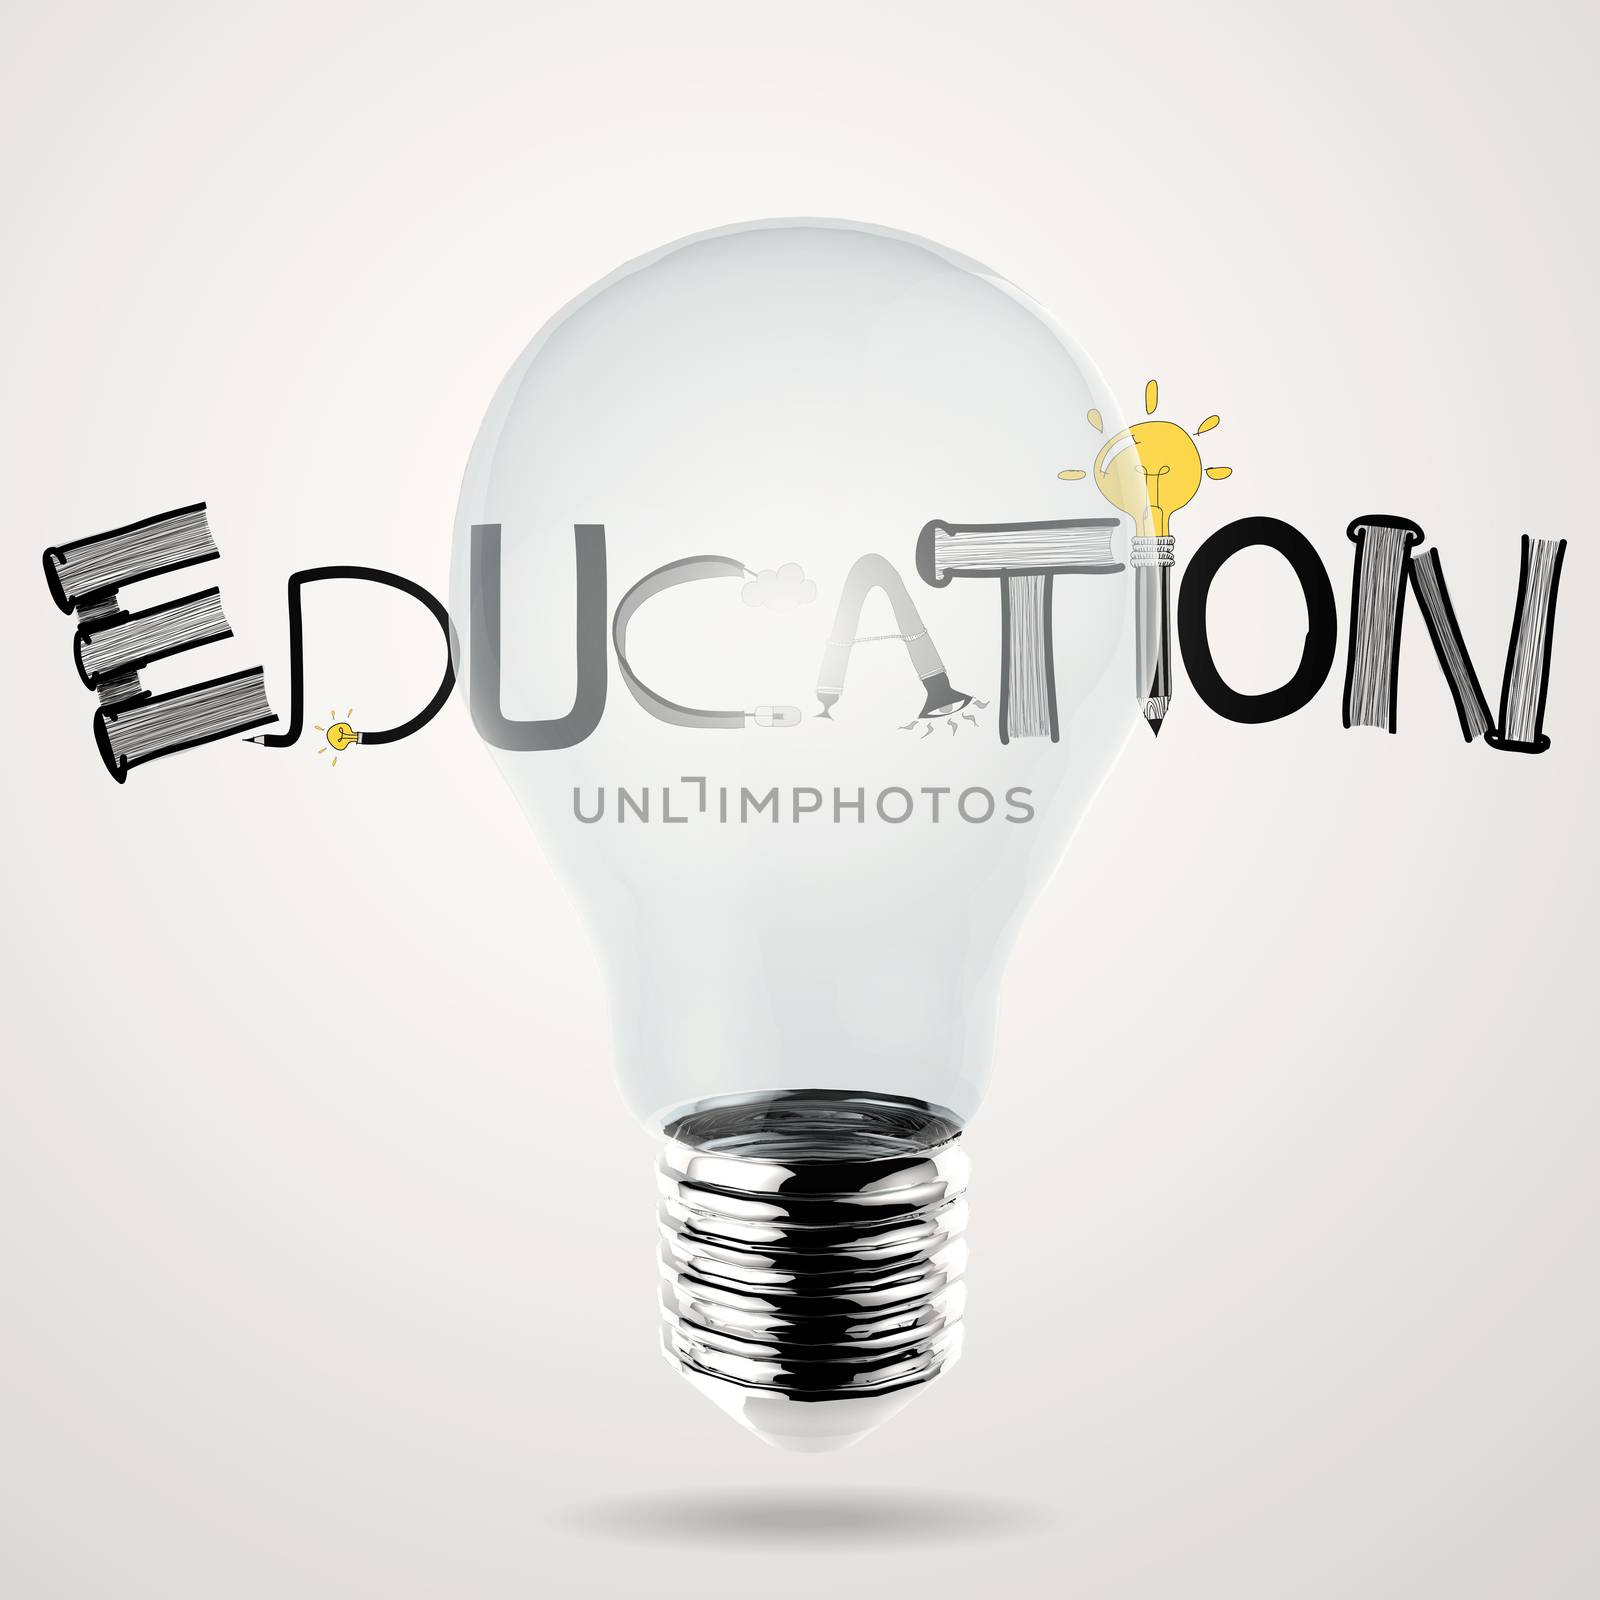  lightbulb 3d and design word EDUCATION as concept by everythingpossible